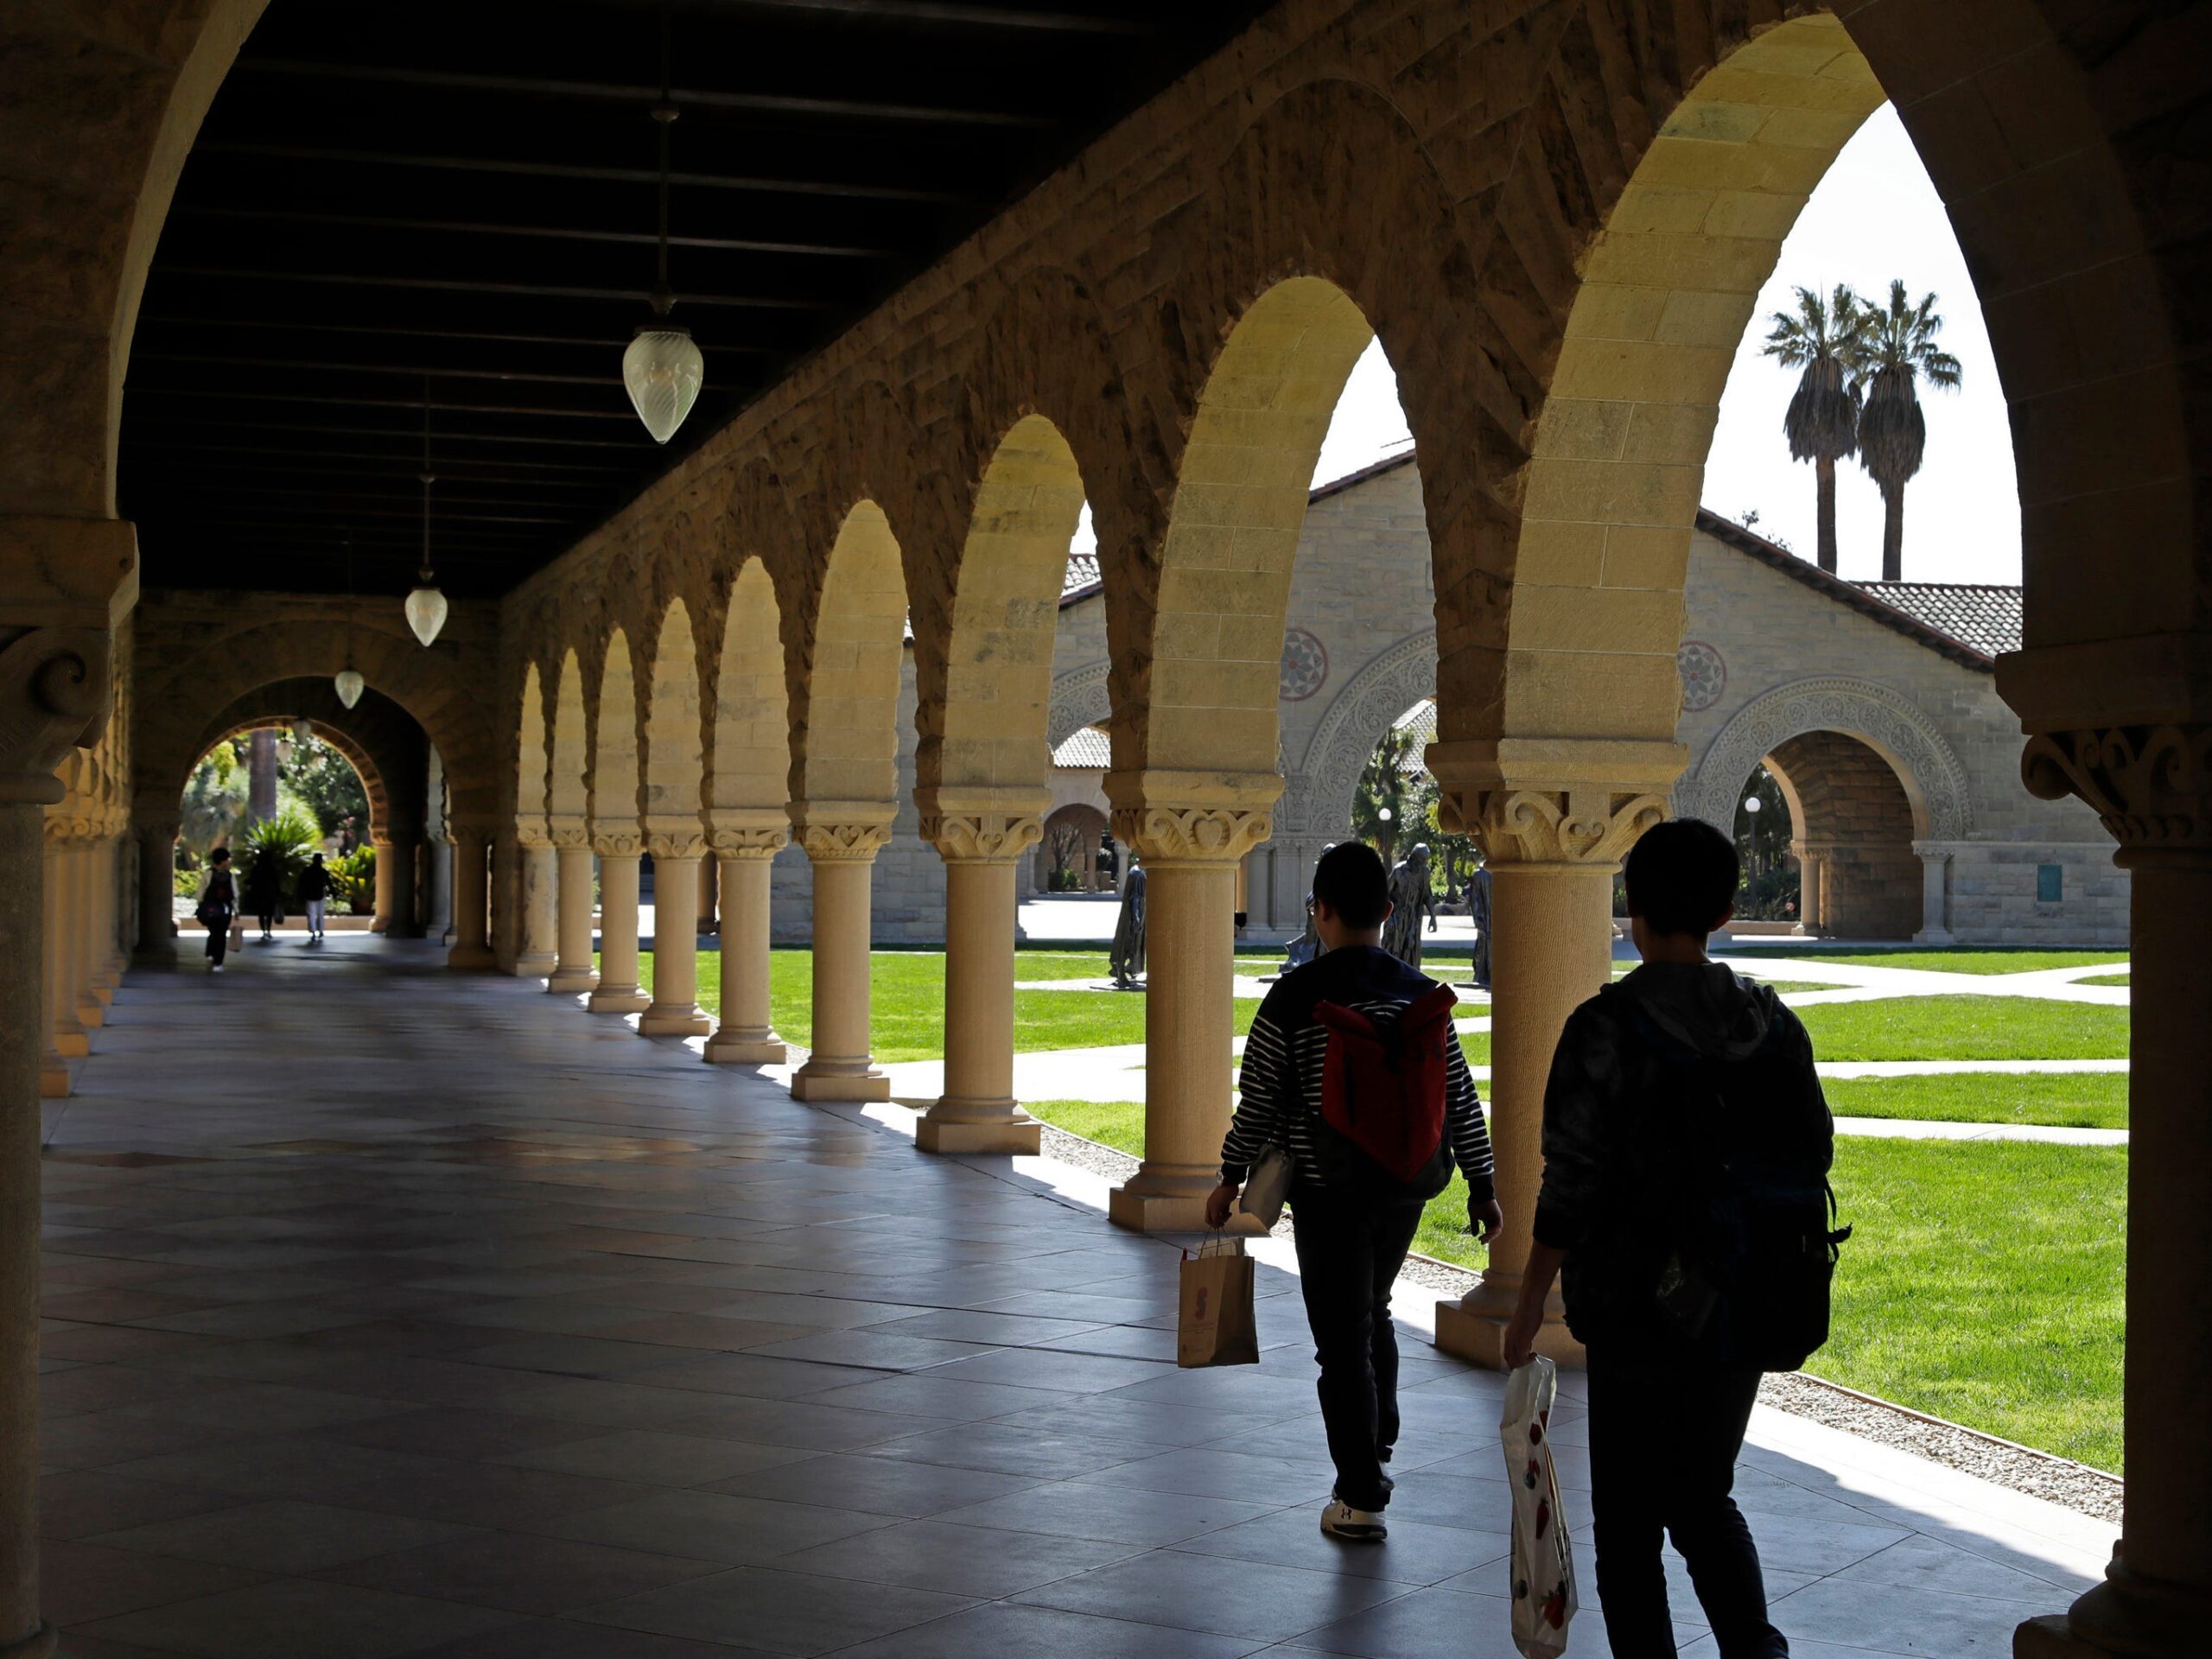 People walking next to columns and arches on the campus of Stanford University.